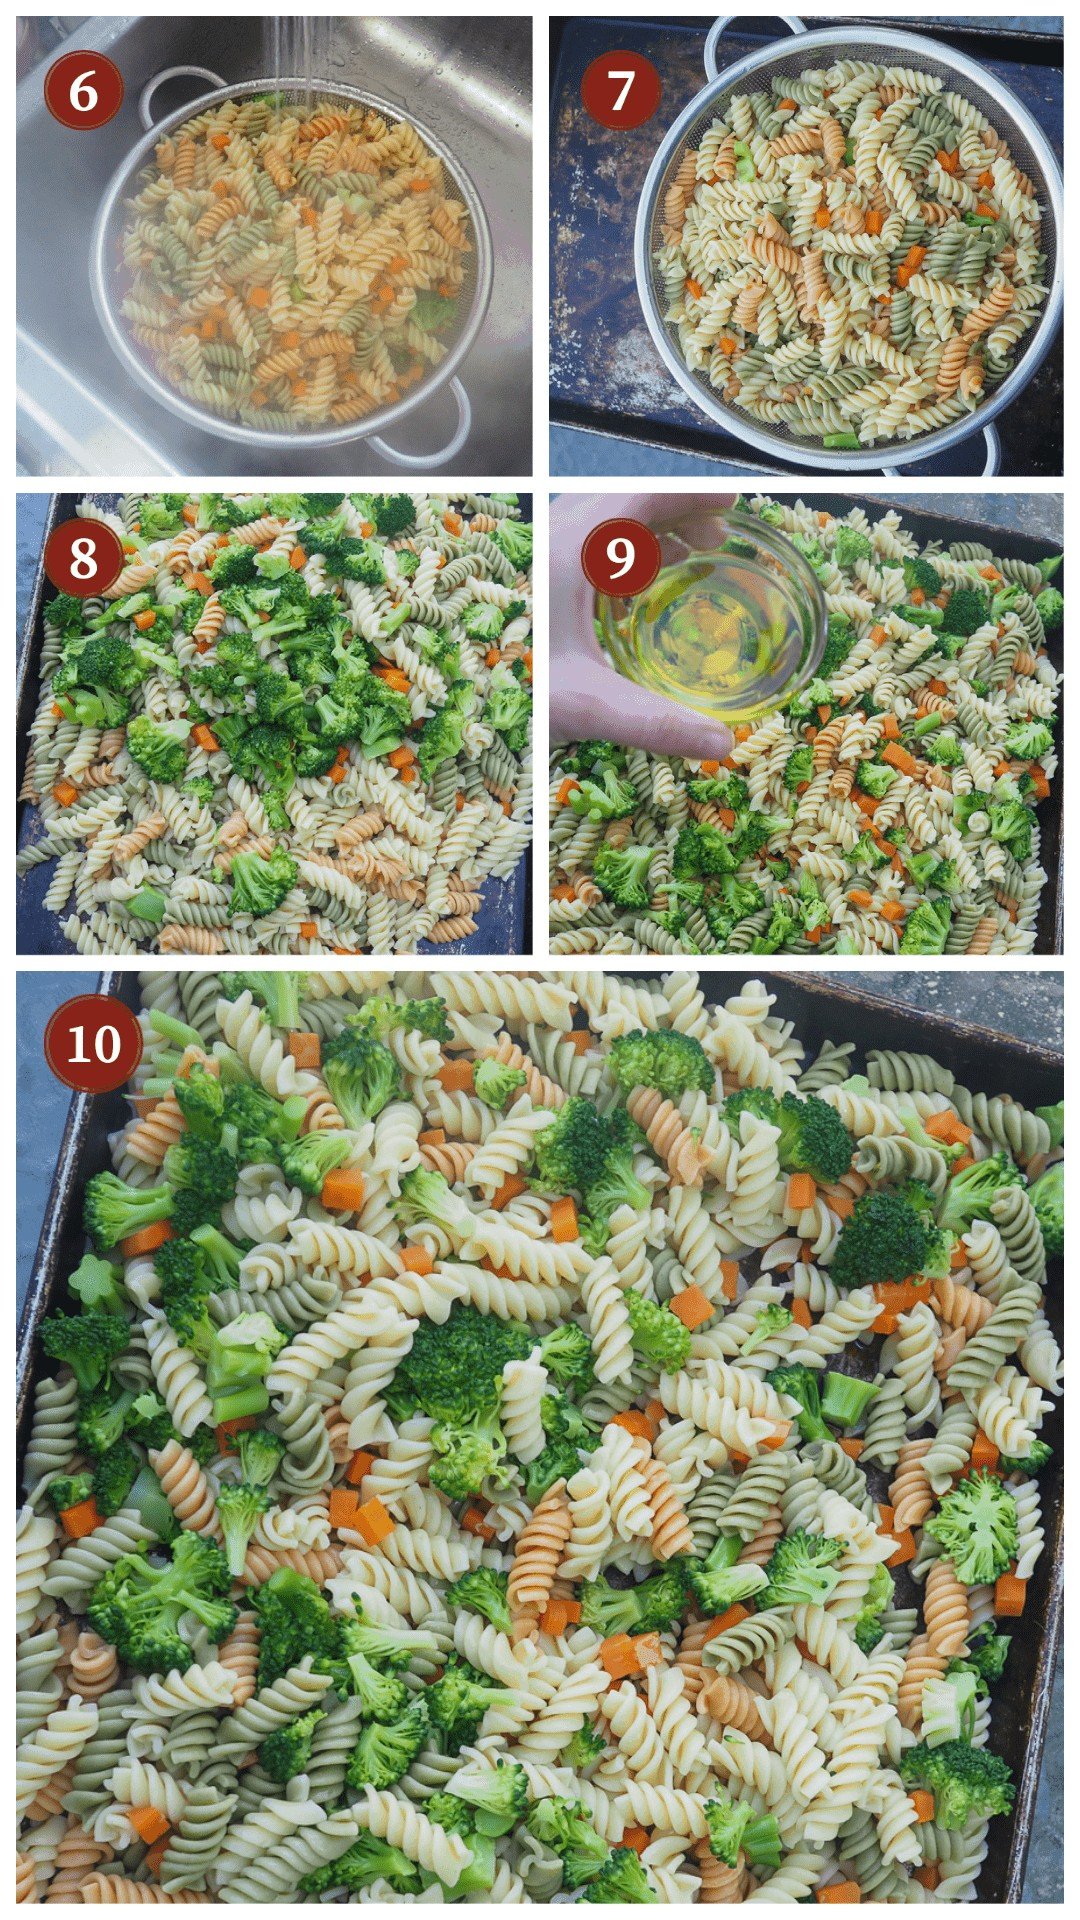 A collage of images showing hot to make pasta salad, steps 6 - 10.